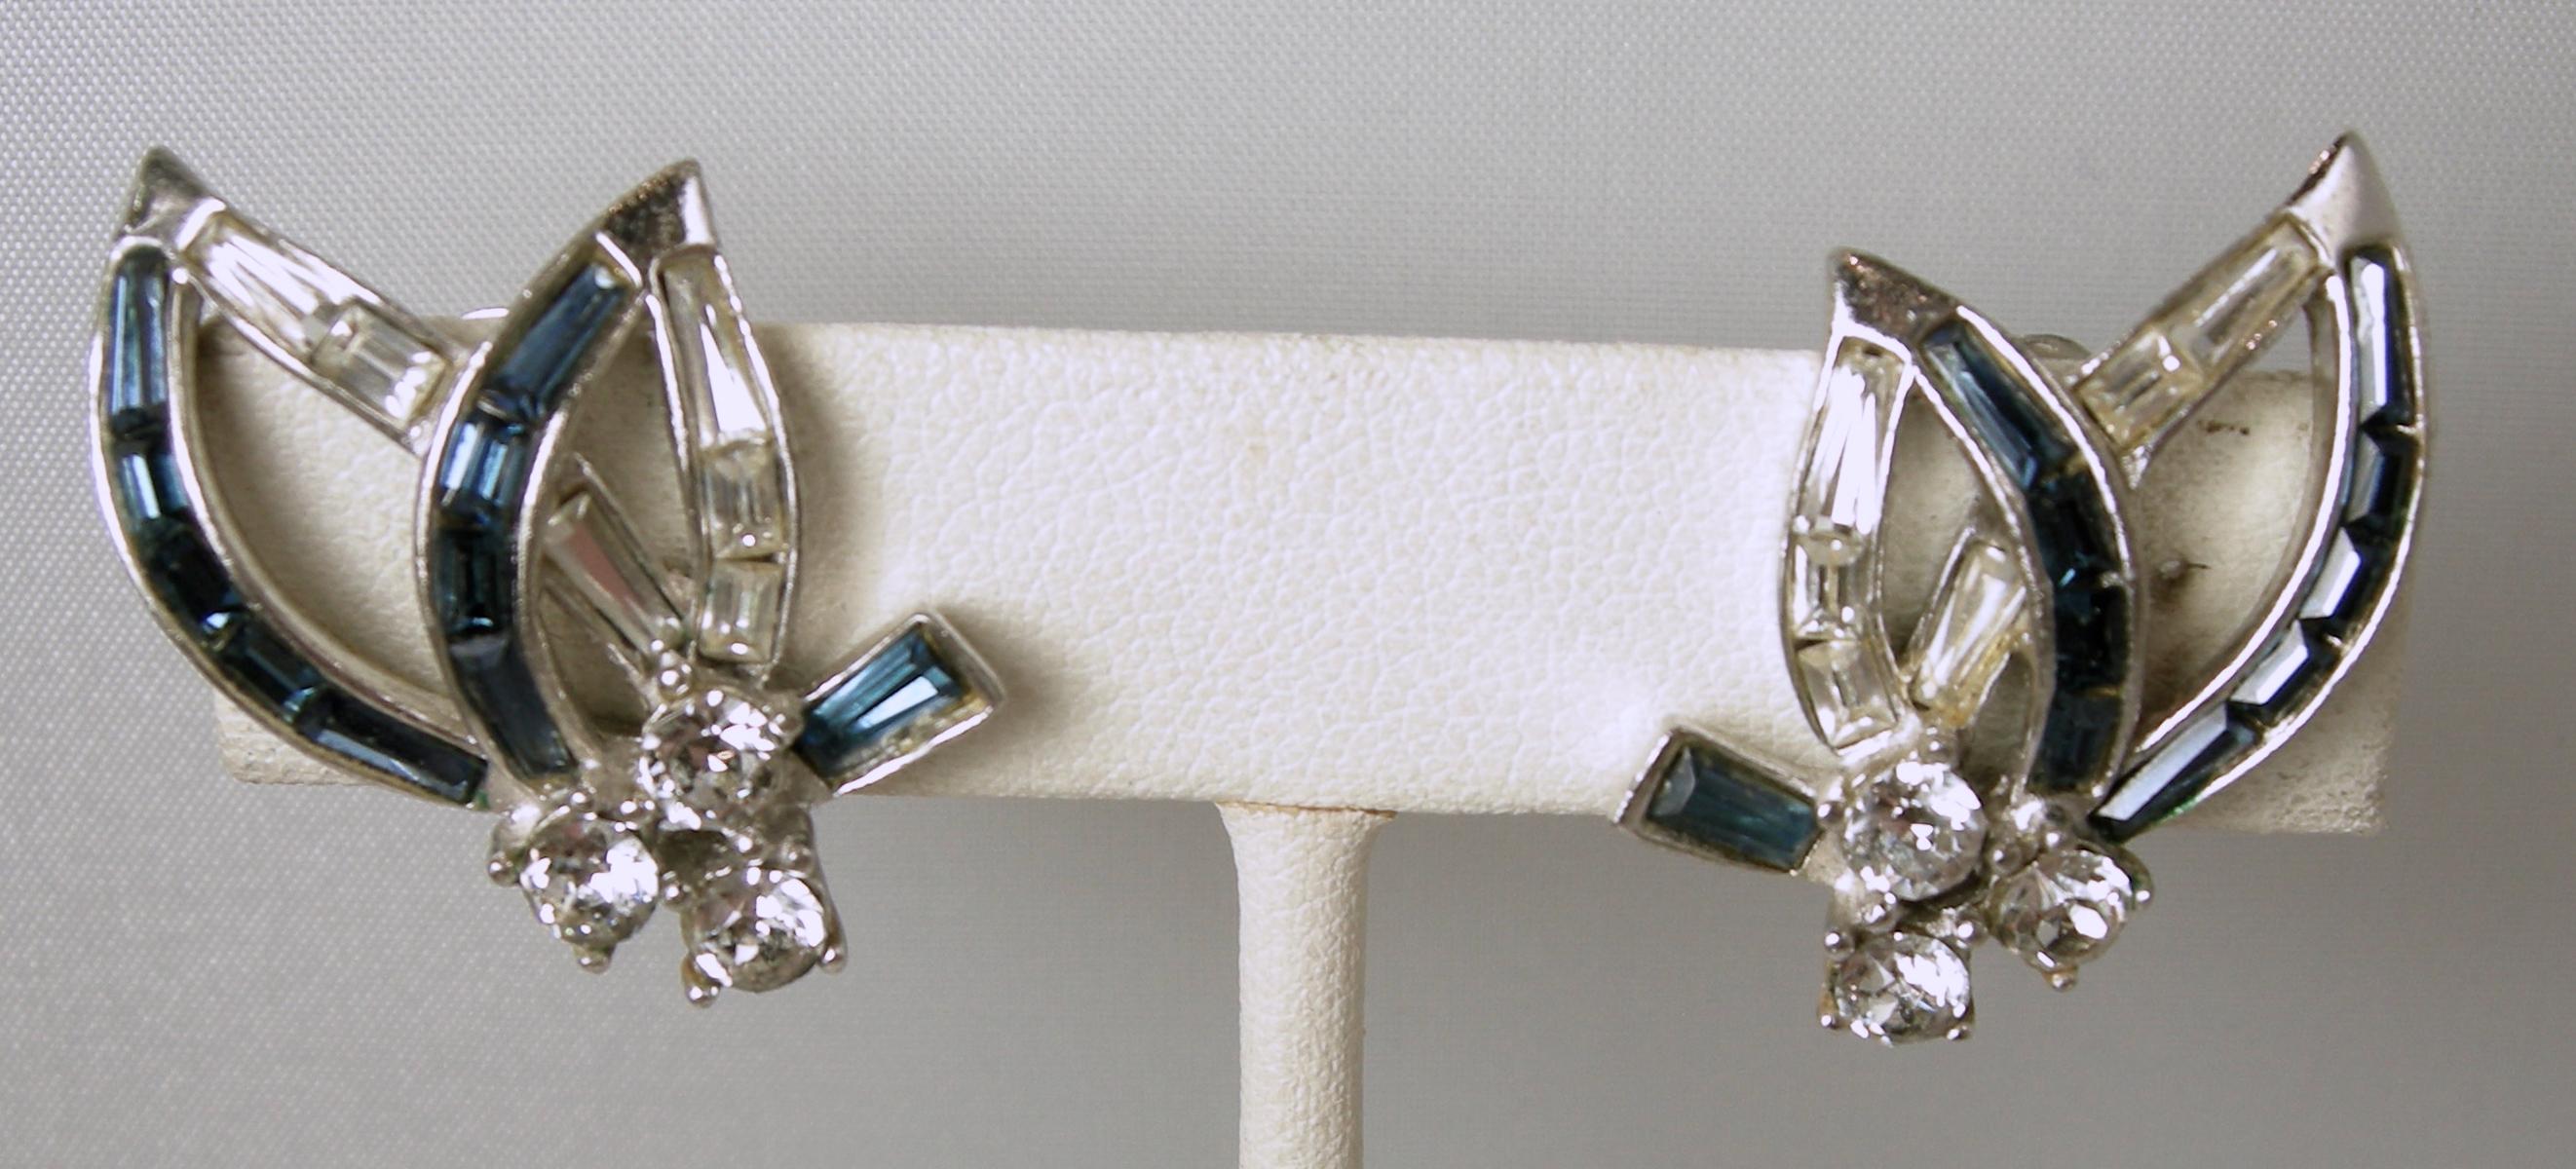 These earrings are unsigned Boucher earrings but it does have the Boucher style number “5280”. They have blue and clear crystals in a rhodium silver tone setting. These clip earrings measure 1-1/4” x 7/8” and are in excellent condition.